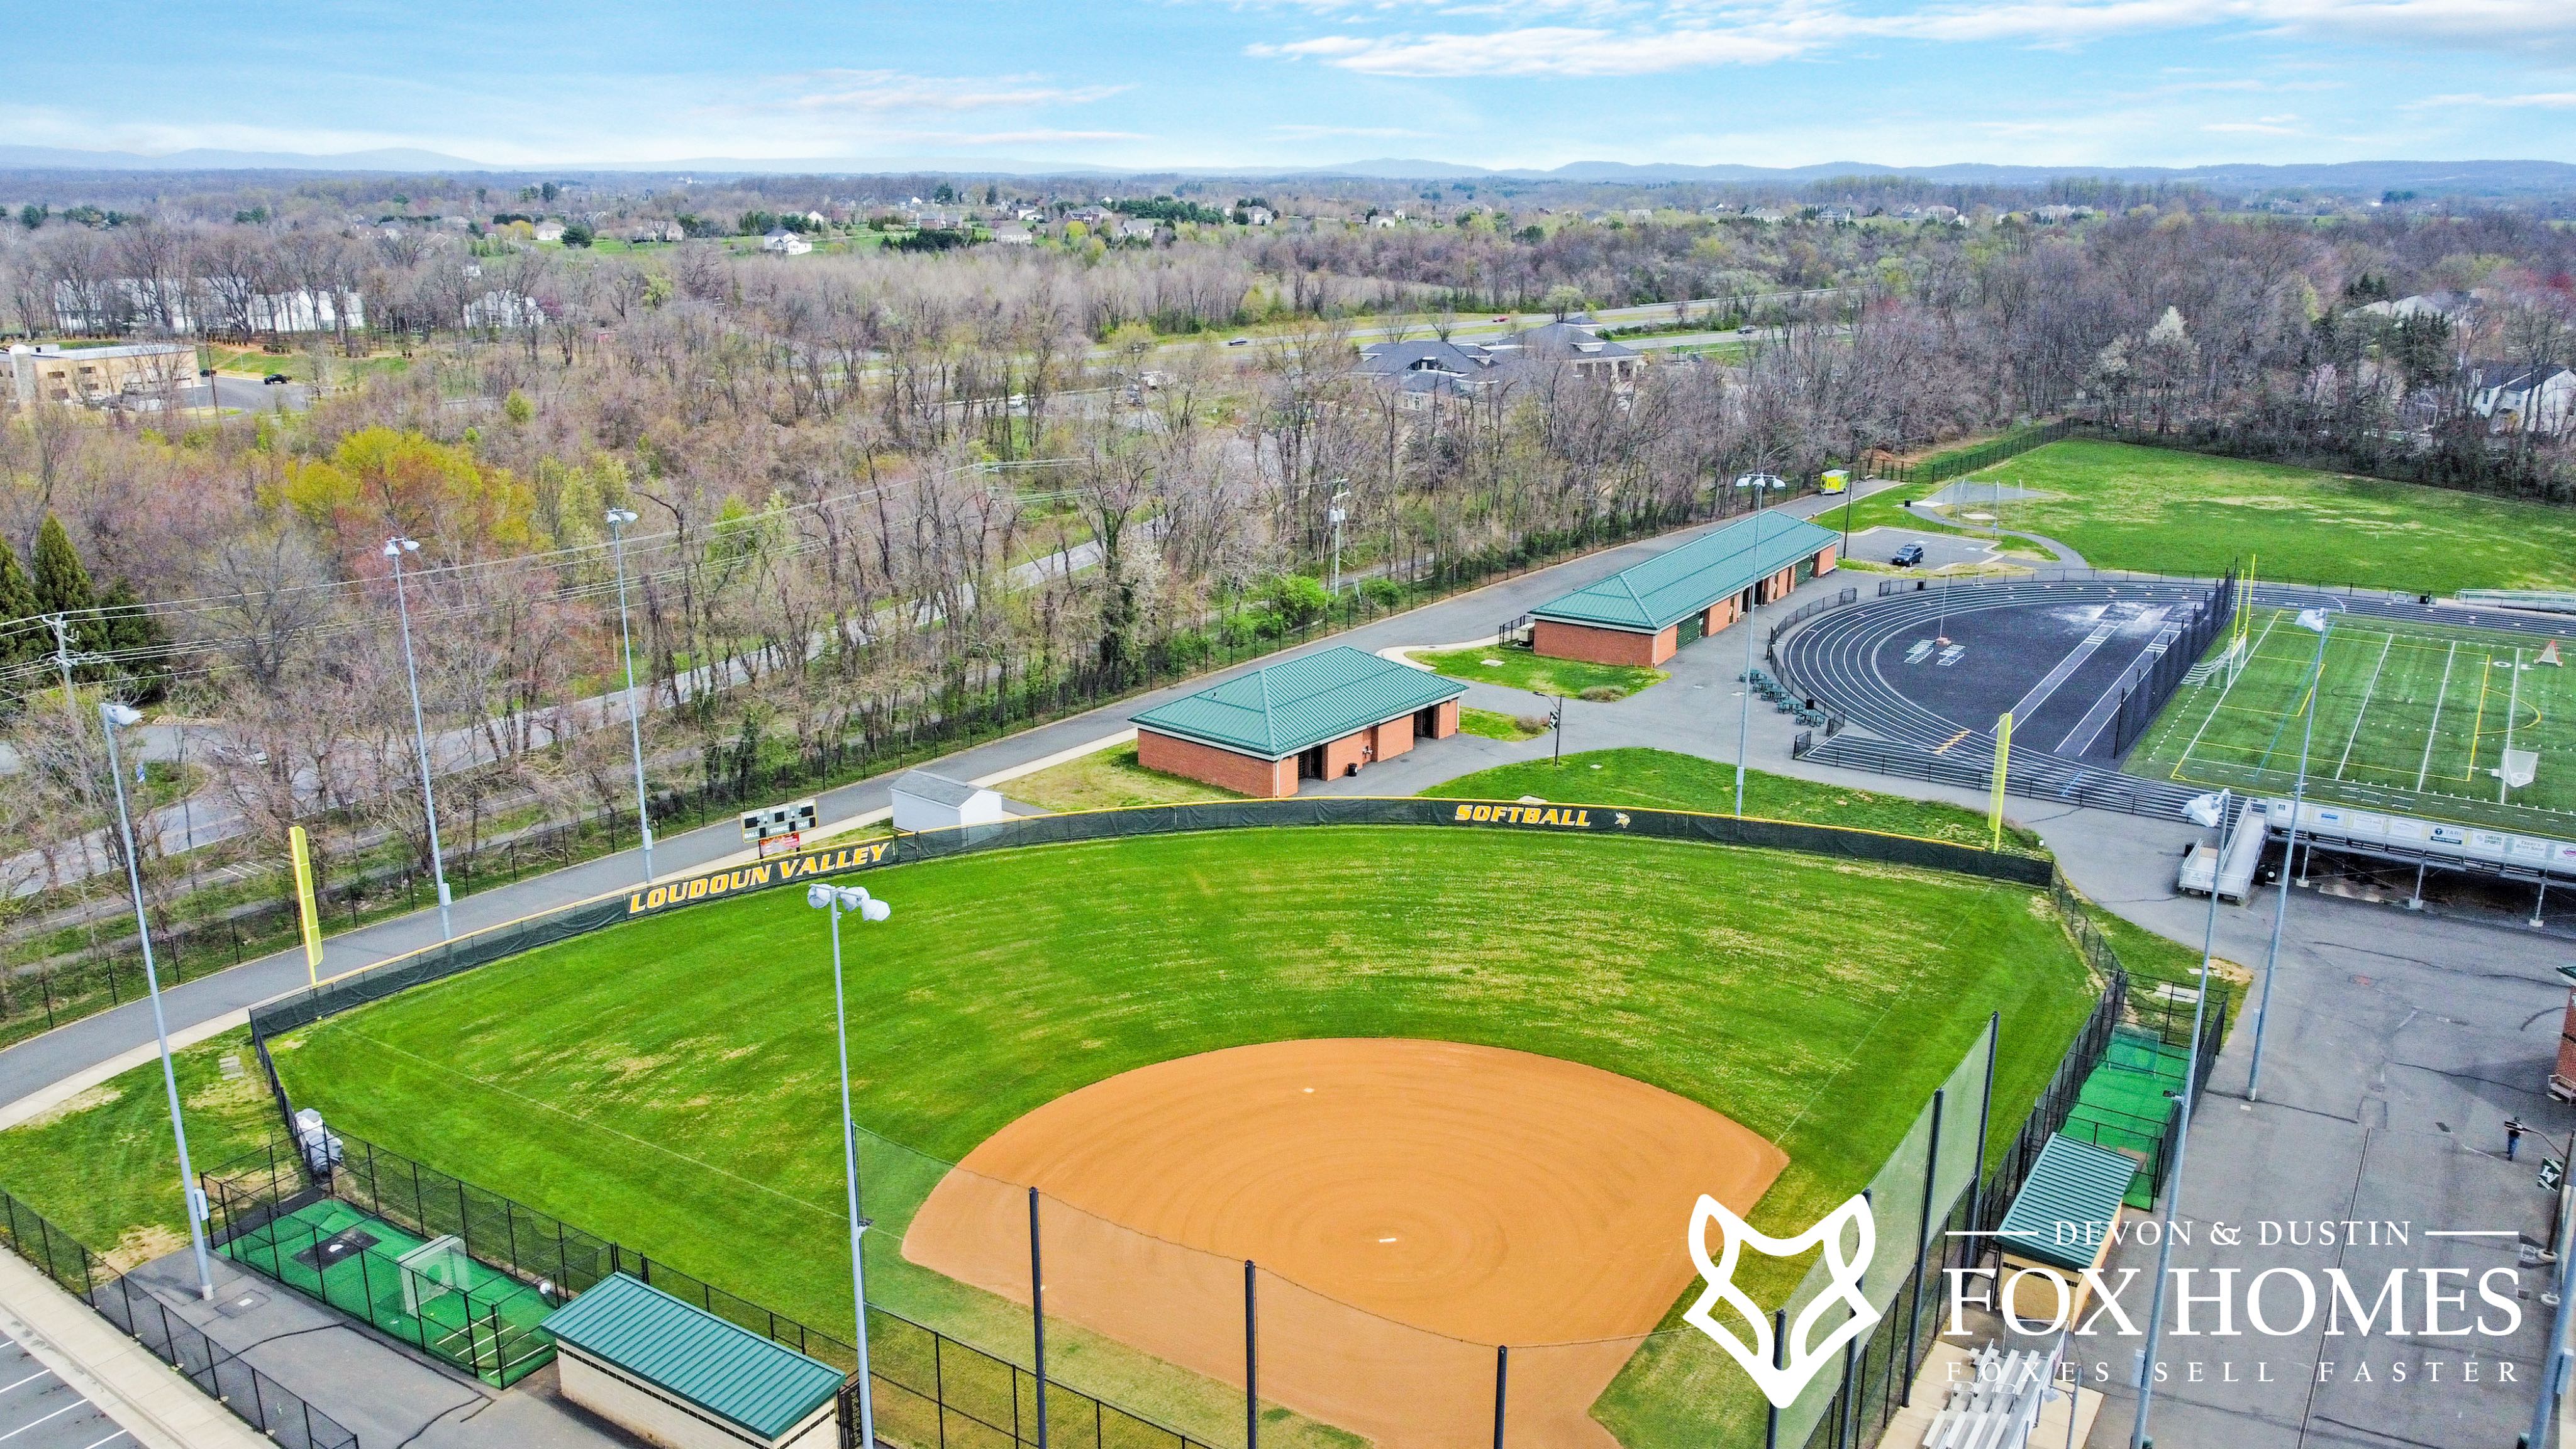 Homes-For-Sale-In-LoudounValley-High-School-District-Devon-and-Dustin-Fox-Fox-Homes-Team-Softball-Field